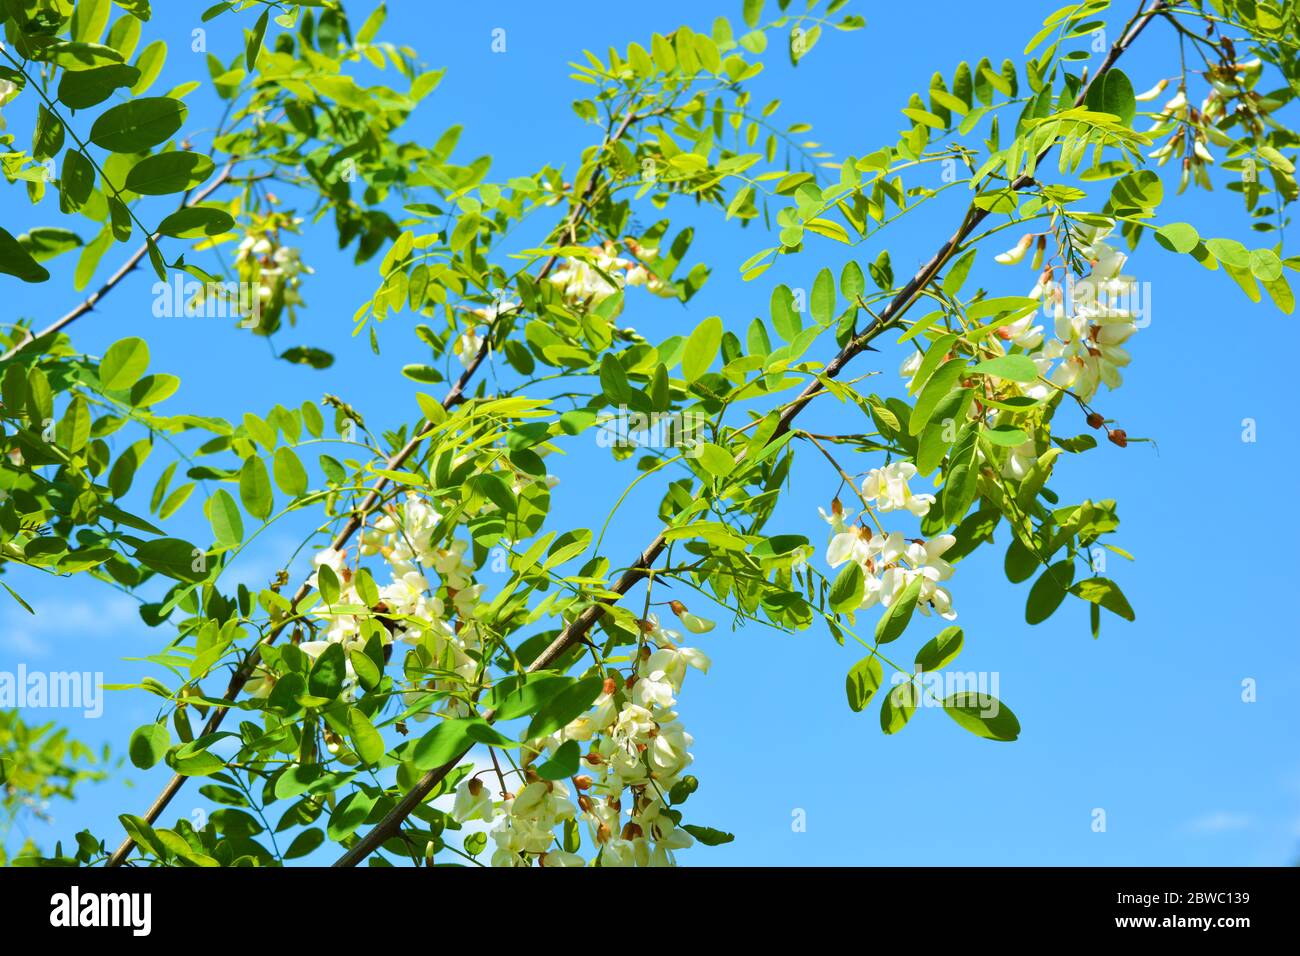 Bright colorful clusters of white flowers with green small leaves blossoming on an acacia tree. Natural nature, beautiful trees and flowers that are i Stock Photo